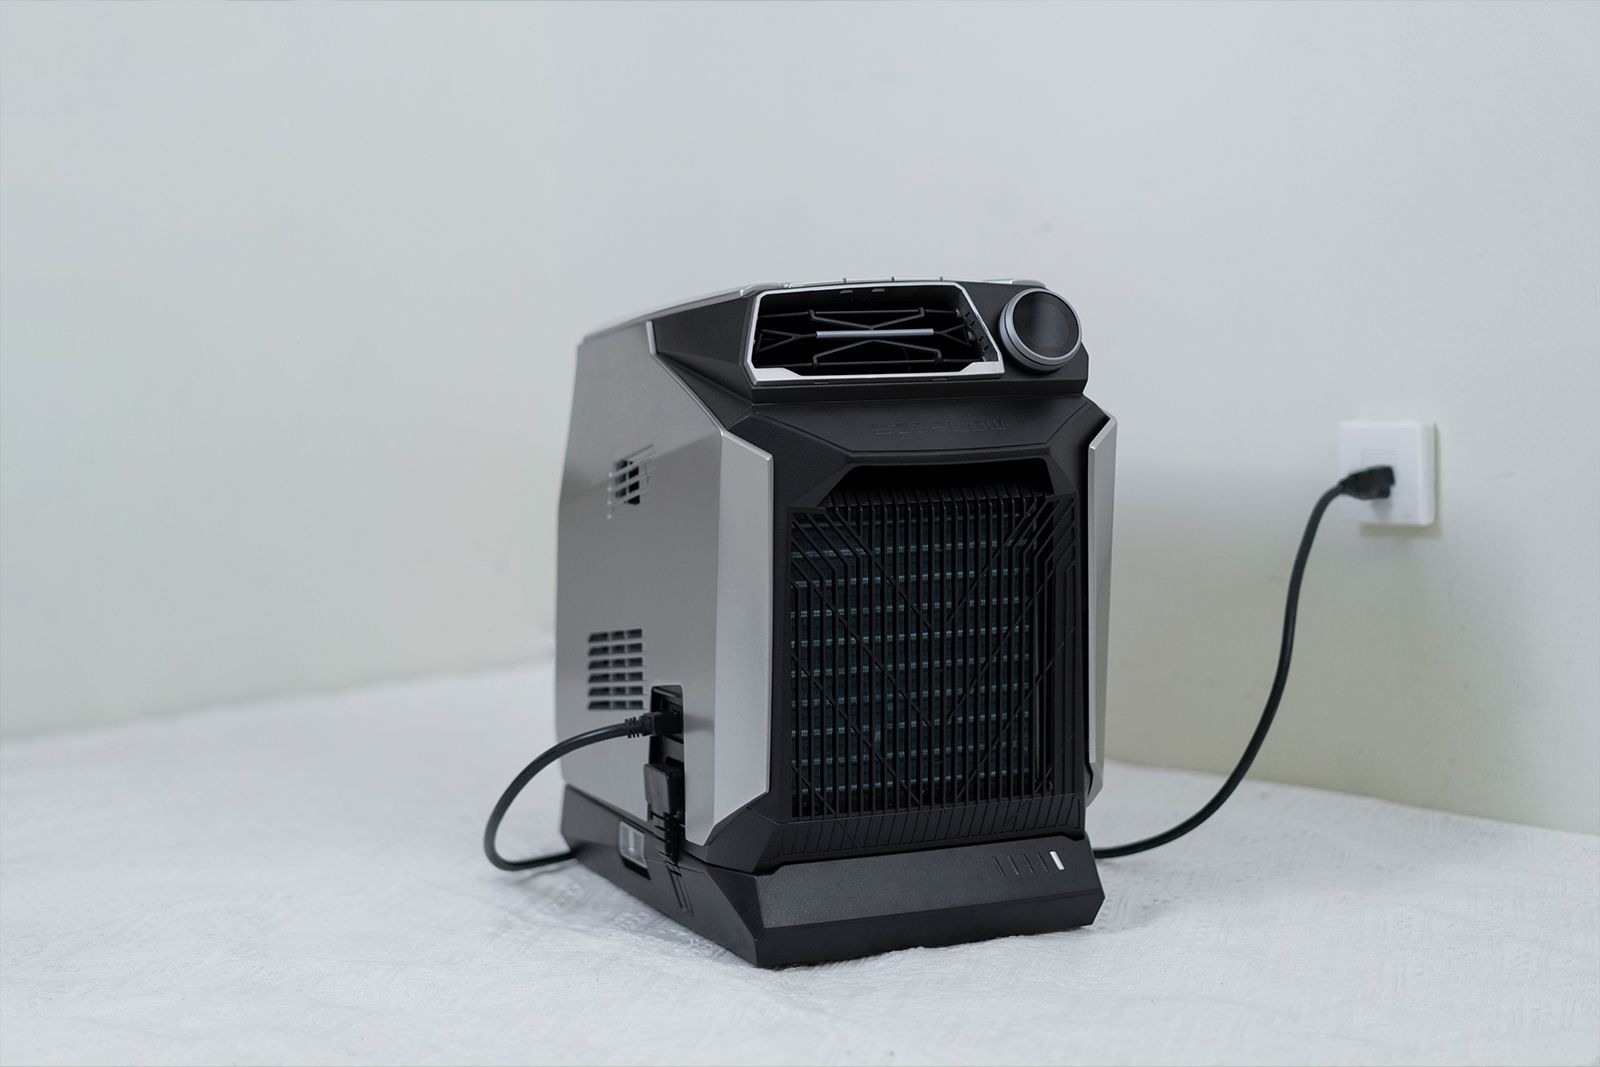 EcoFlow Wave is one of the most convenient portable air conditioners for campers and RVers photo 2